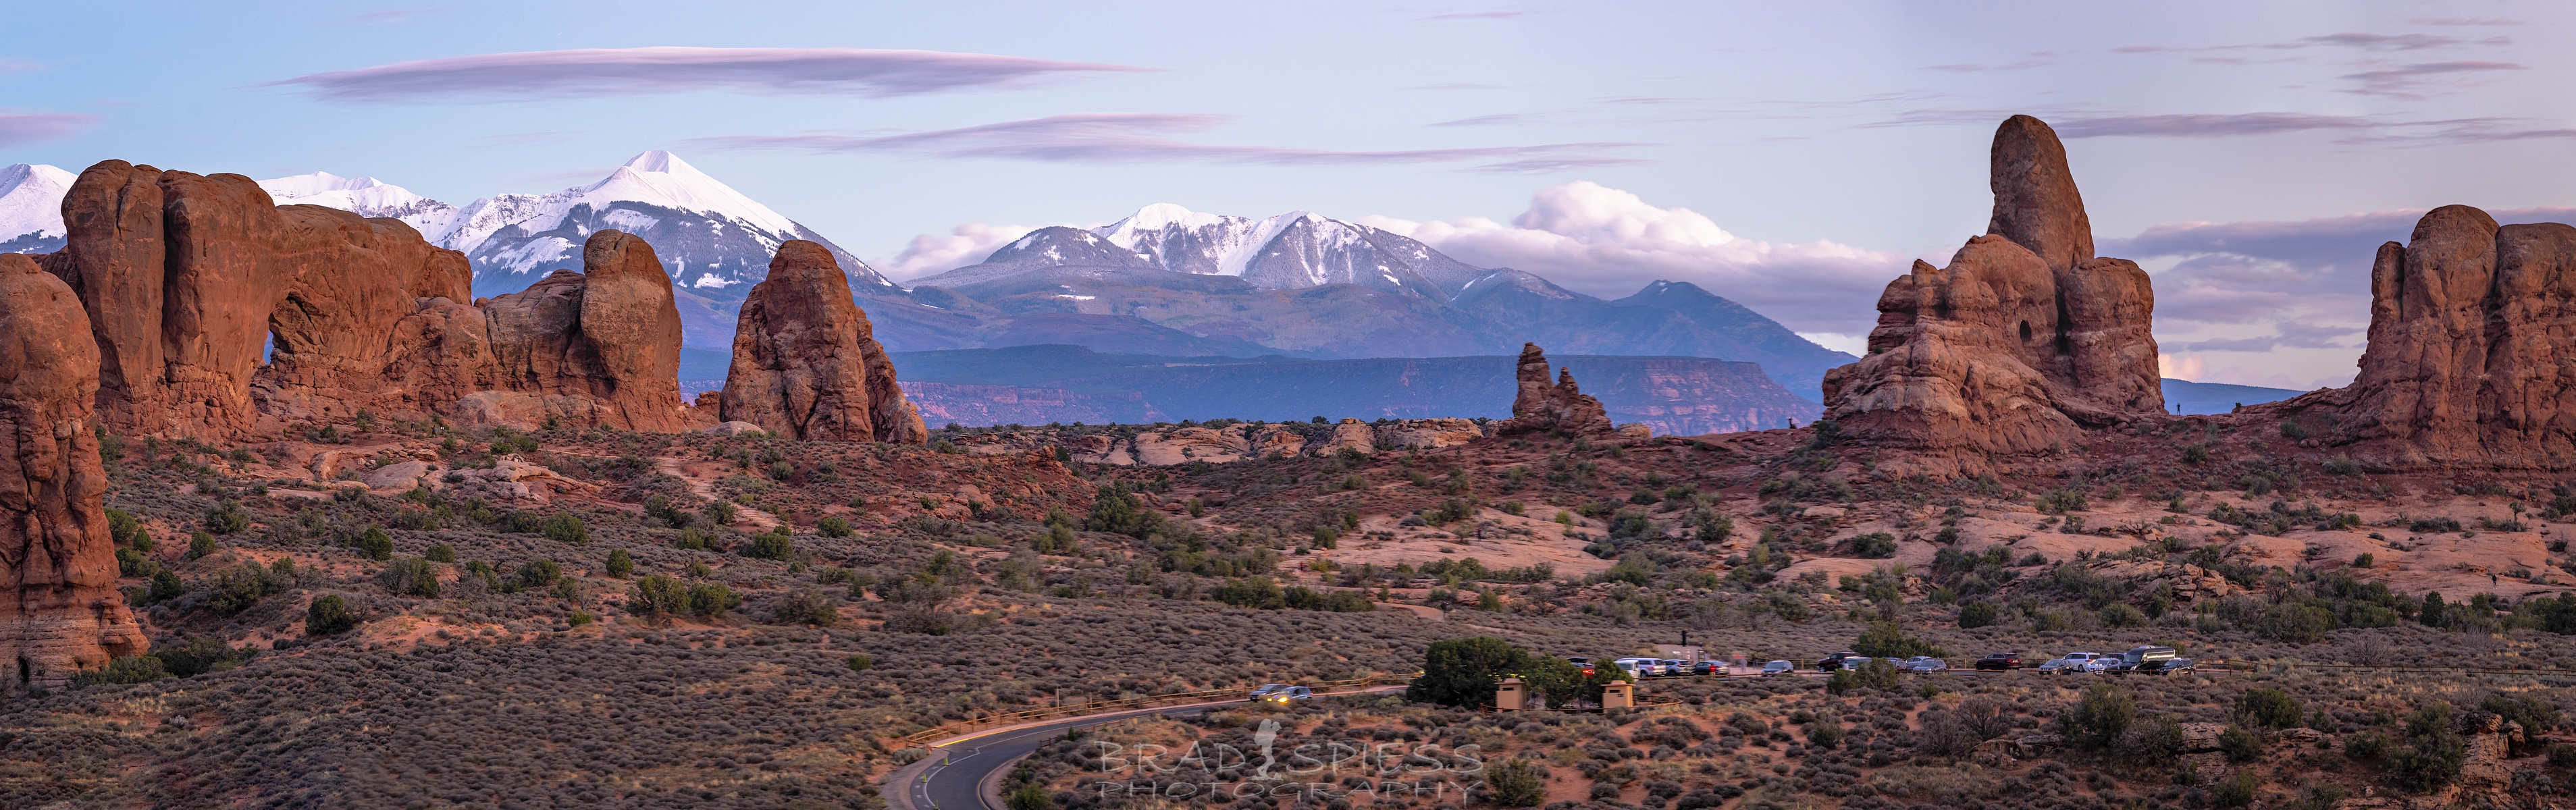 A more detailed panorama looking towards the La Sal Mountains behind the rocks in Arches National Park